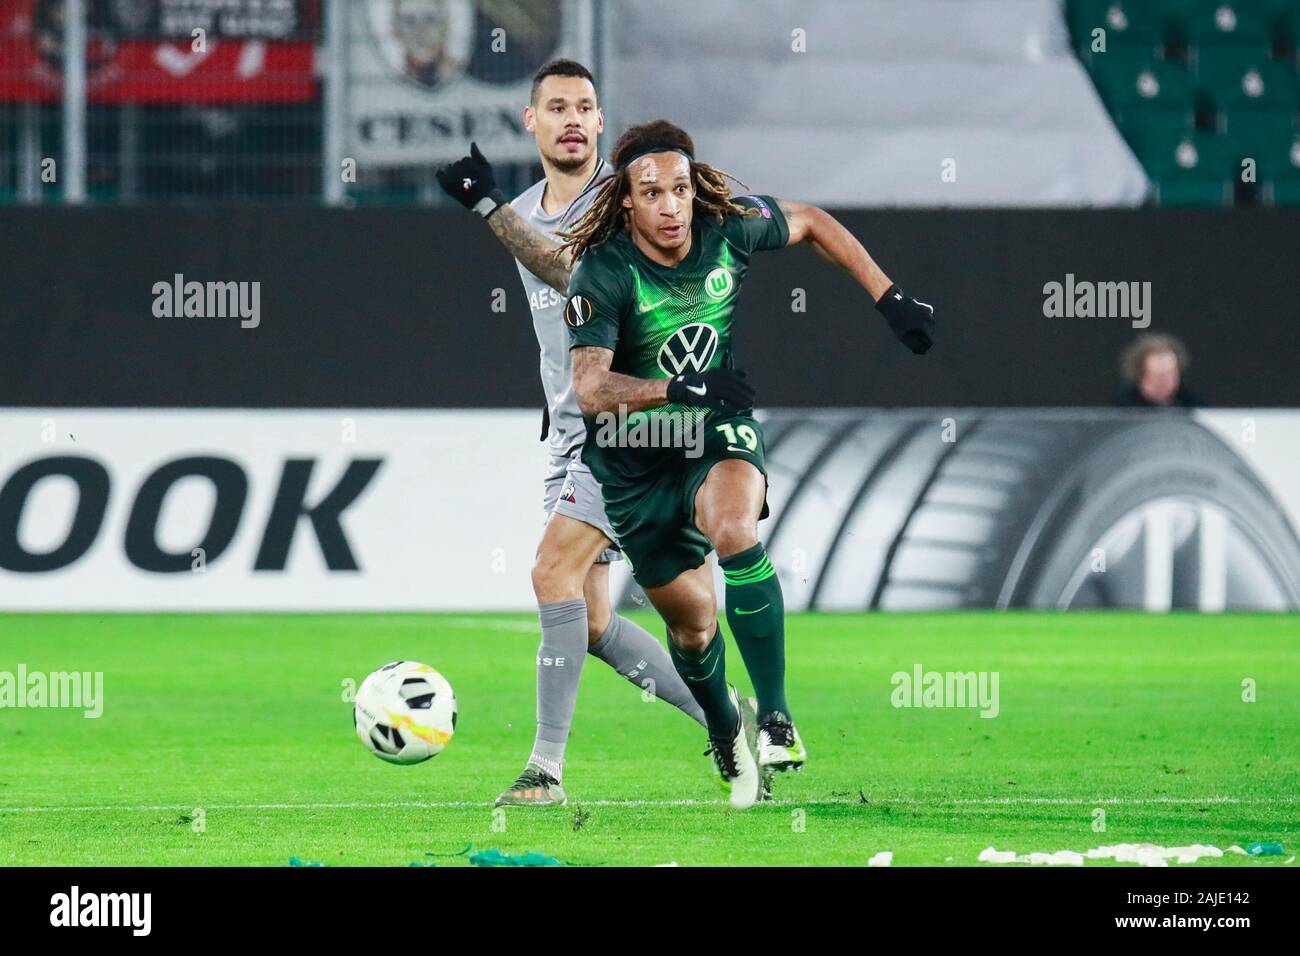 Wolfsburg, Germany, December 12, 2019: football player Kevin Mbabu of VfL Wolfsburg in action during the UEFA Europa League match Stock Photo